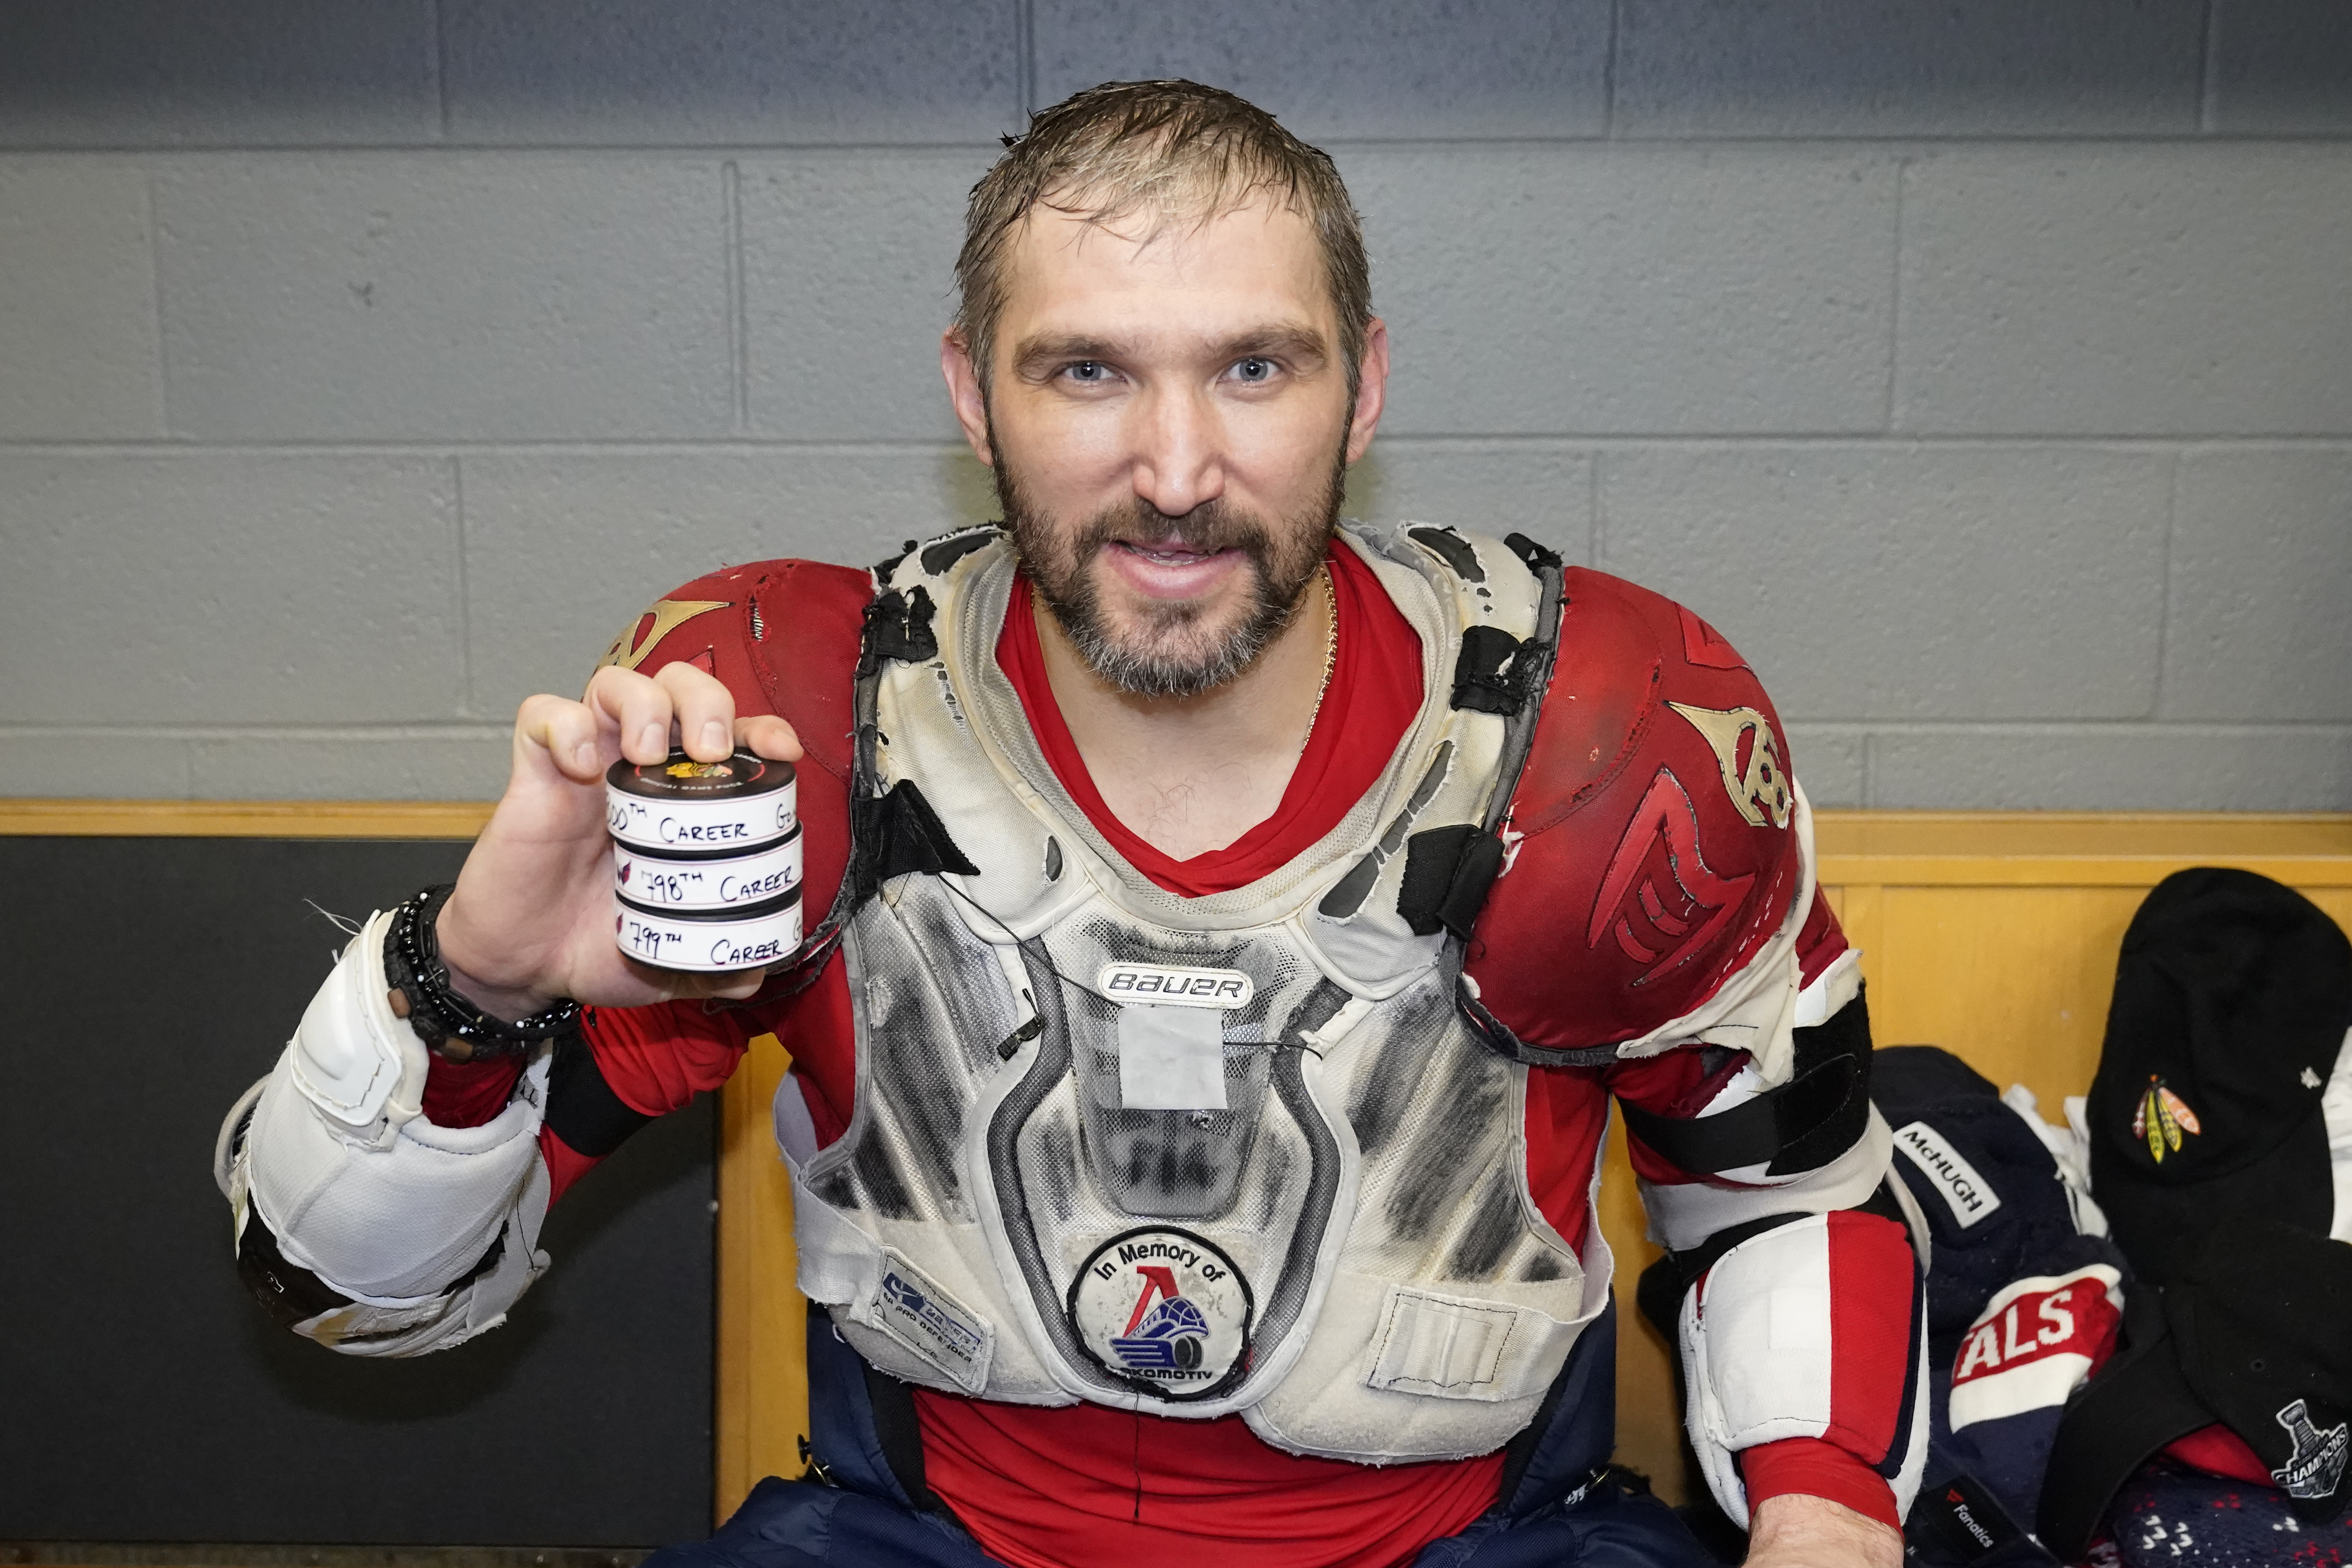 Alex Ovechkin reaches 800 career goals with hat trick - WTOP News